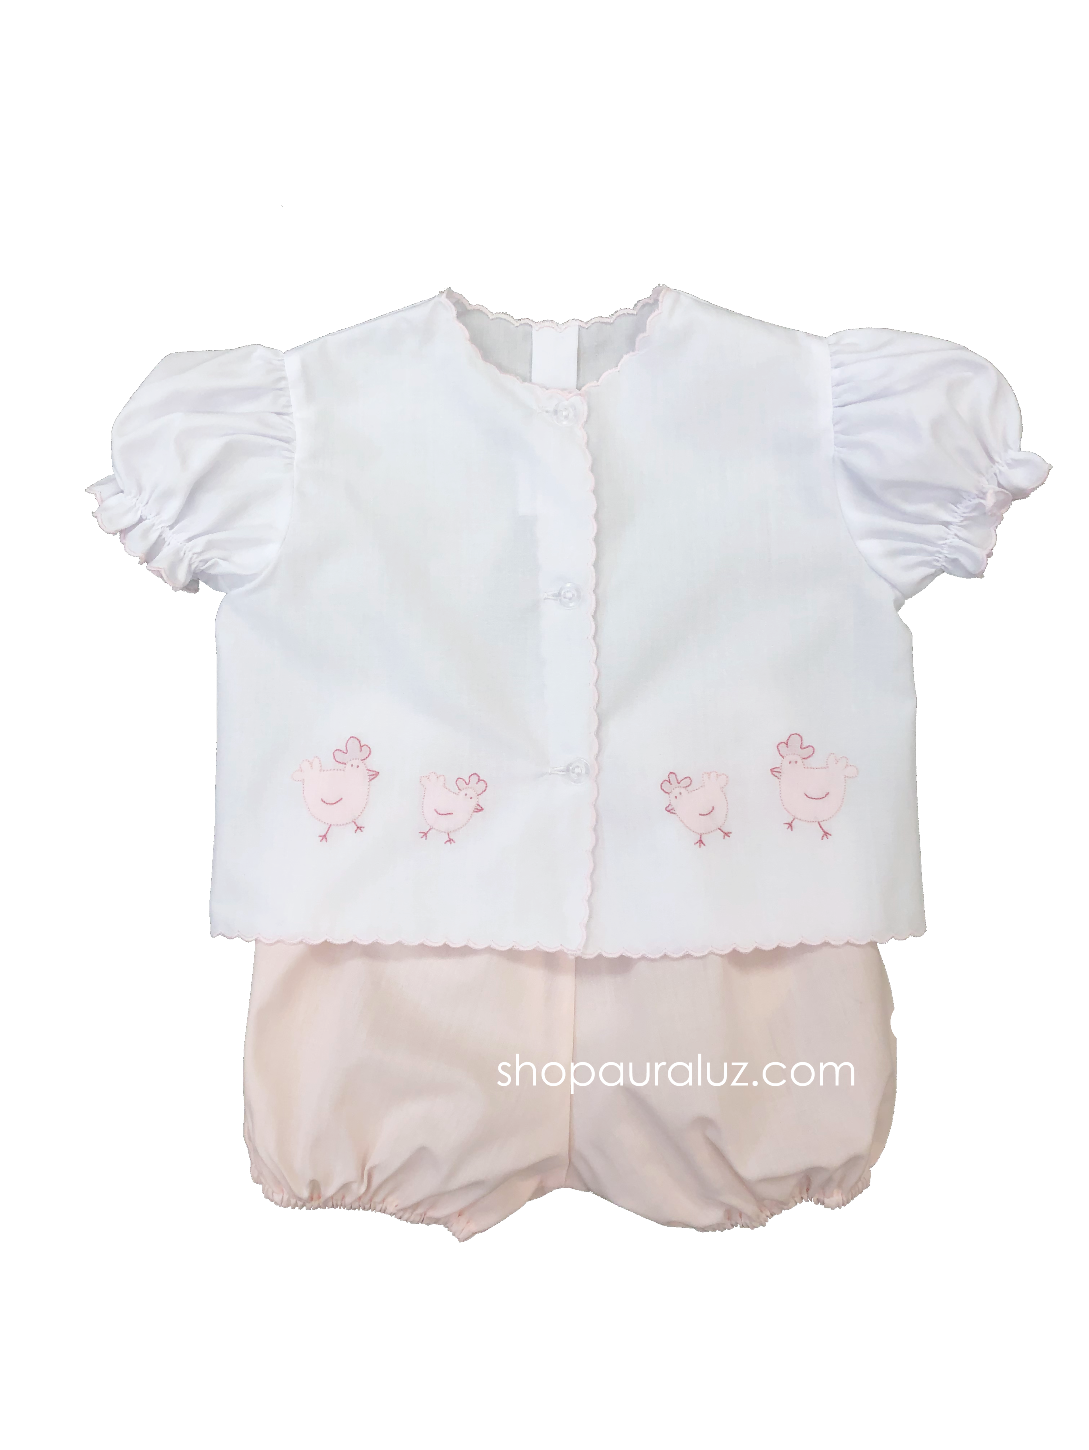 Auraluz Diaper shirt/bloomer set...White with pink scallops(pink bloomers) and embroidered chickens